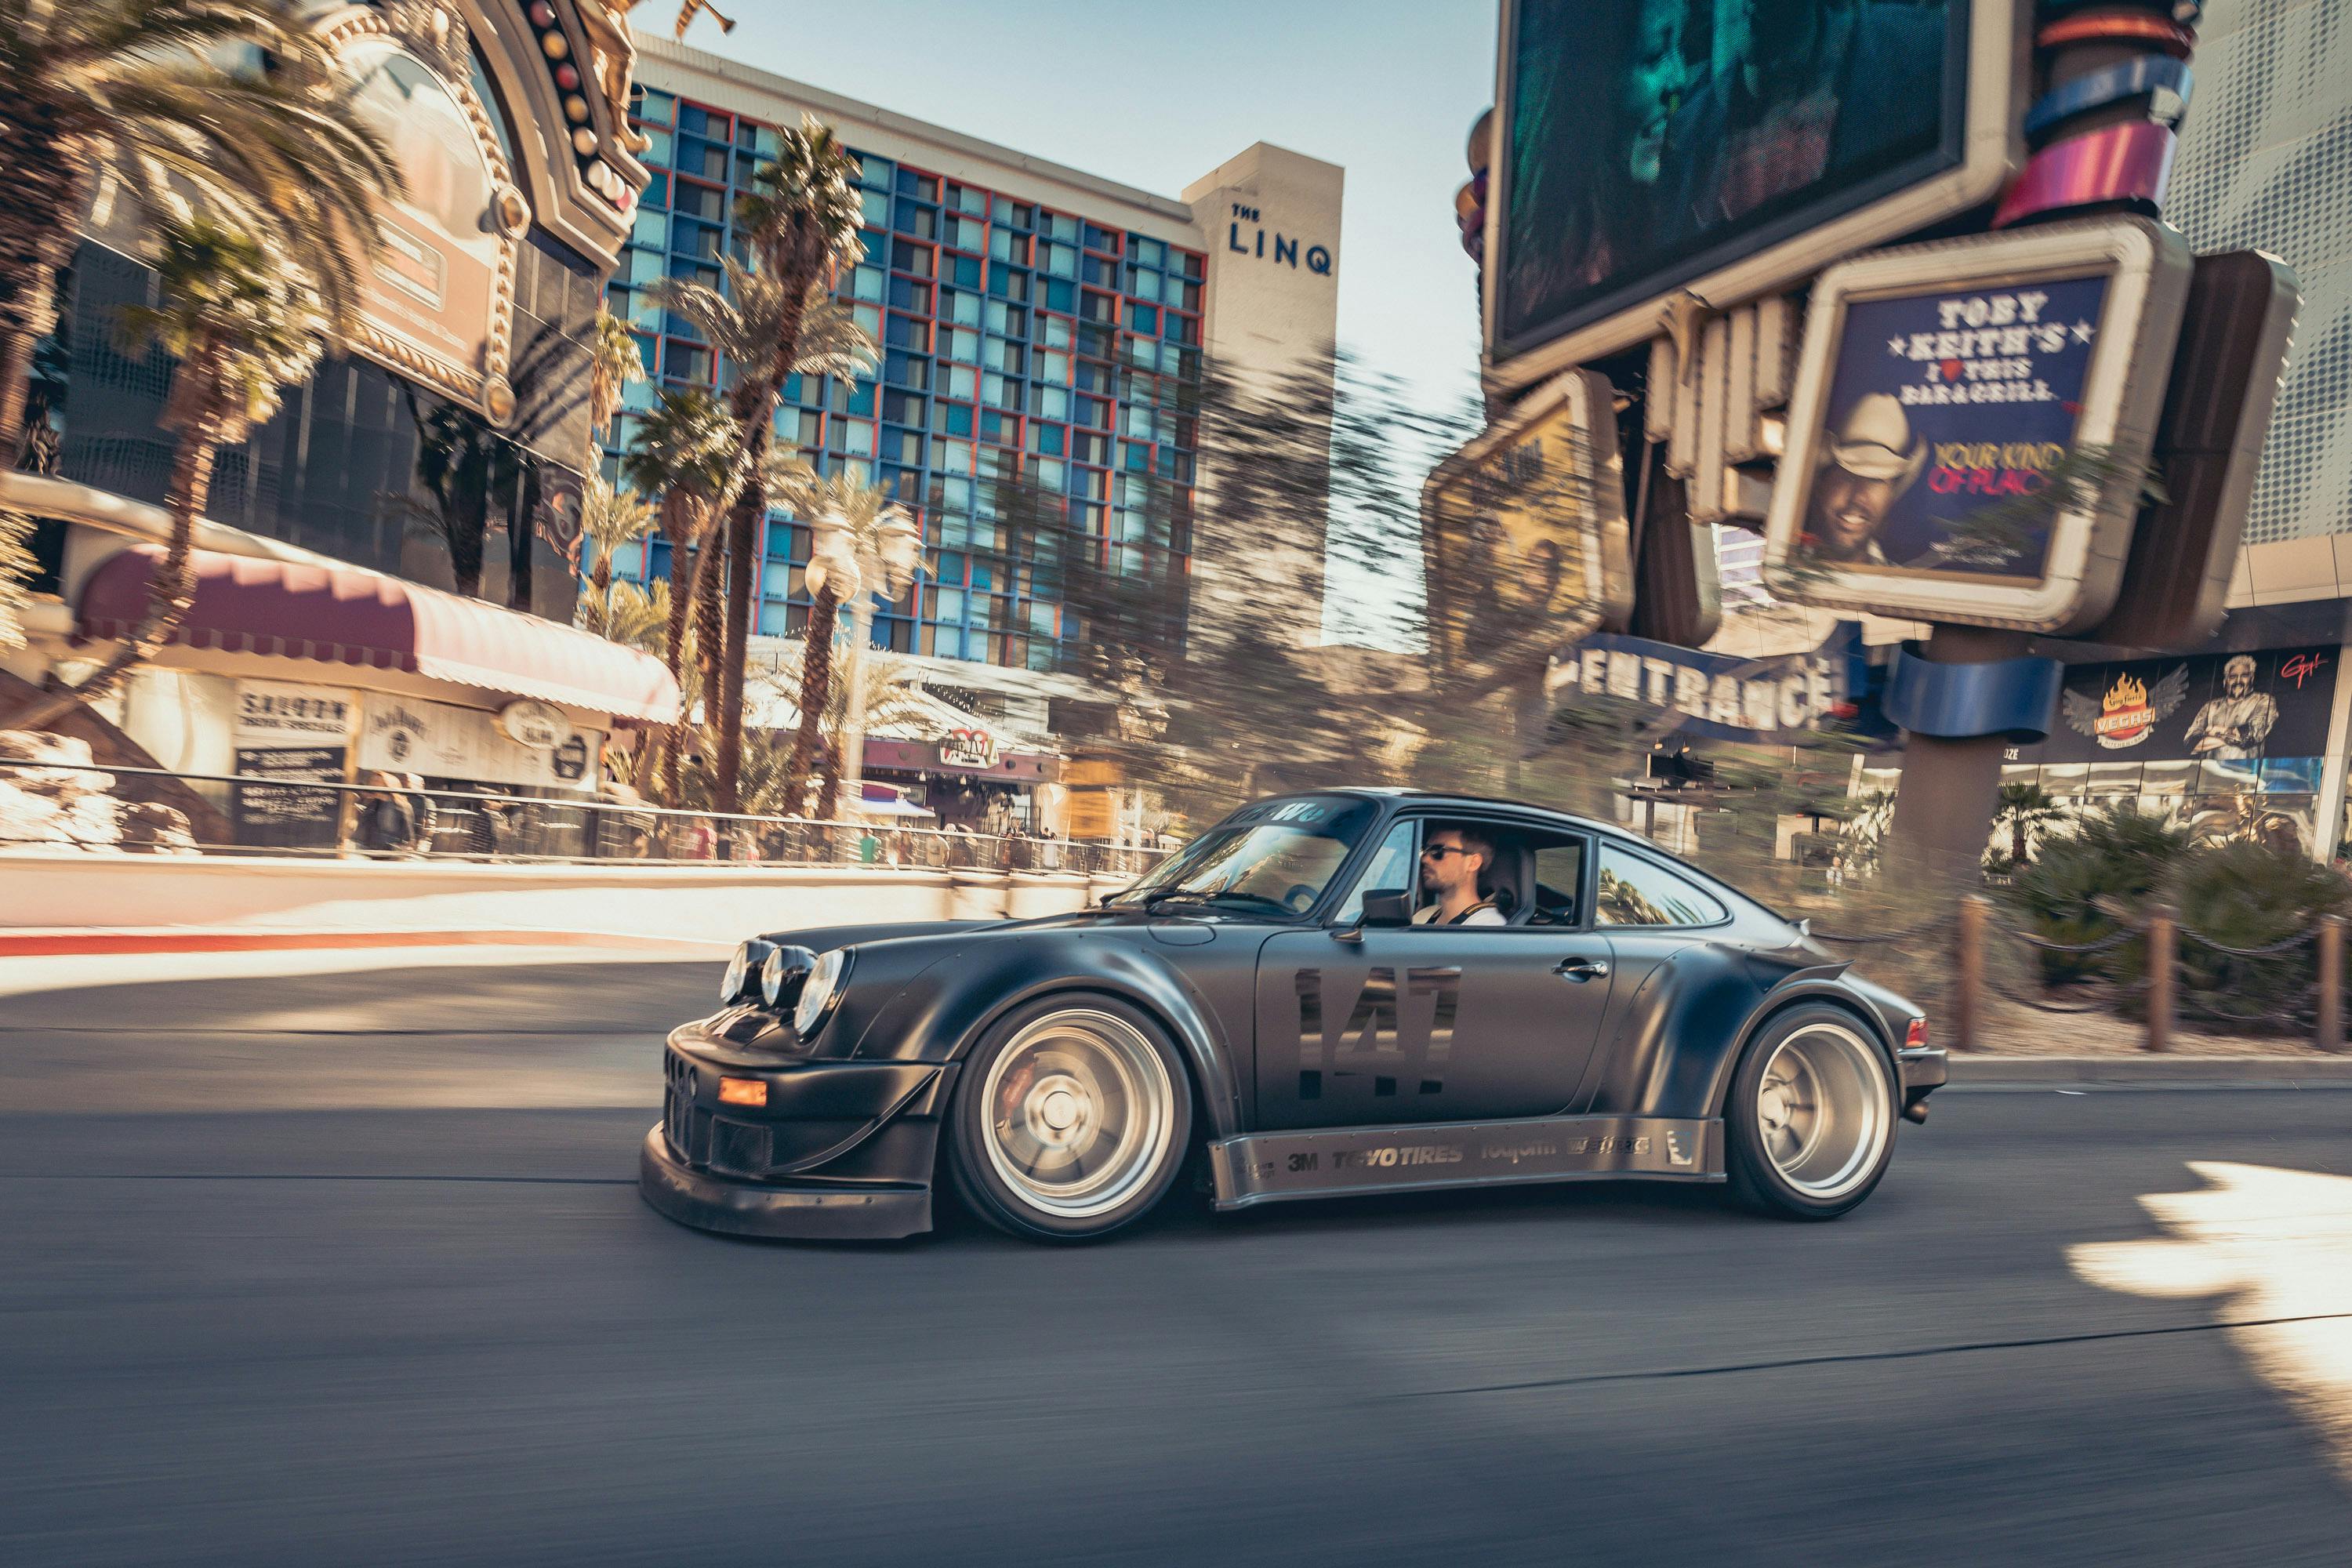 Rolling shot of the Need for Speed Porsche 964 driven by BBC Top Gear